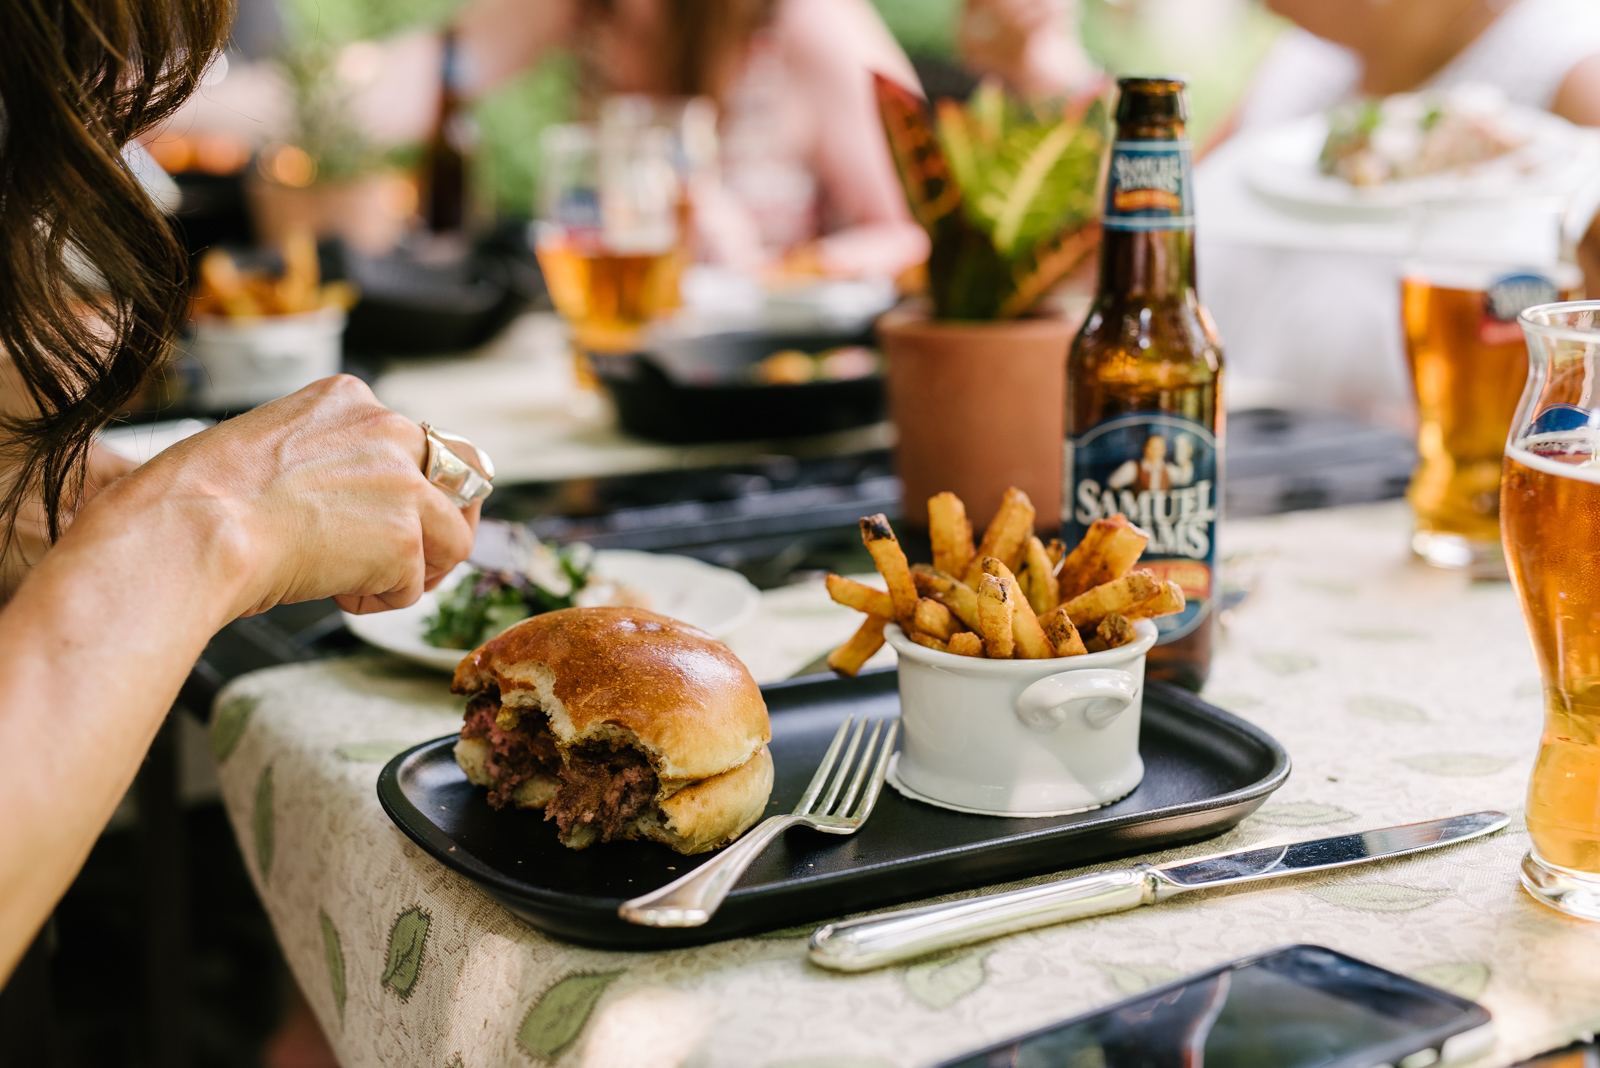 Guests indulging in the burger, beer and fries